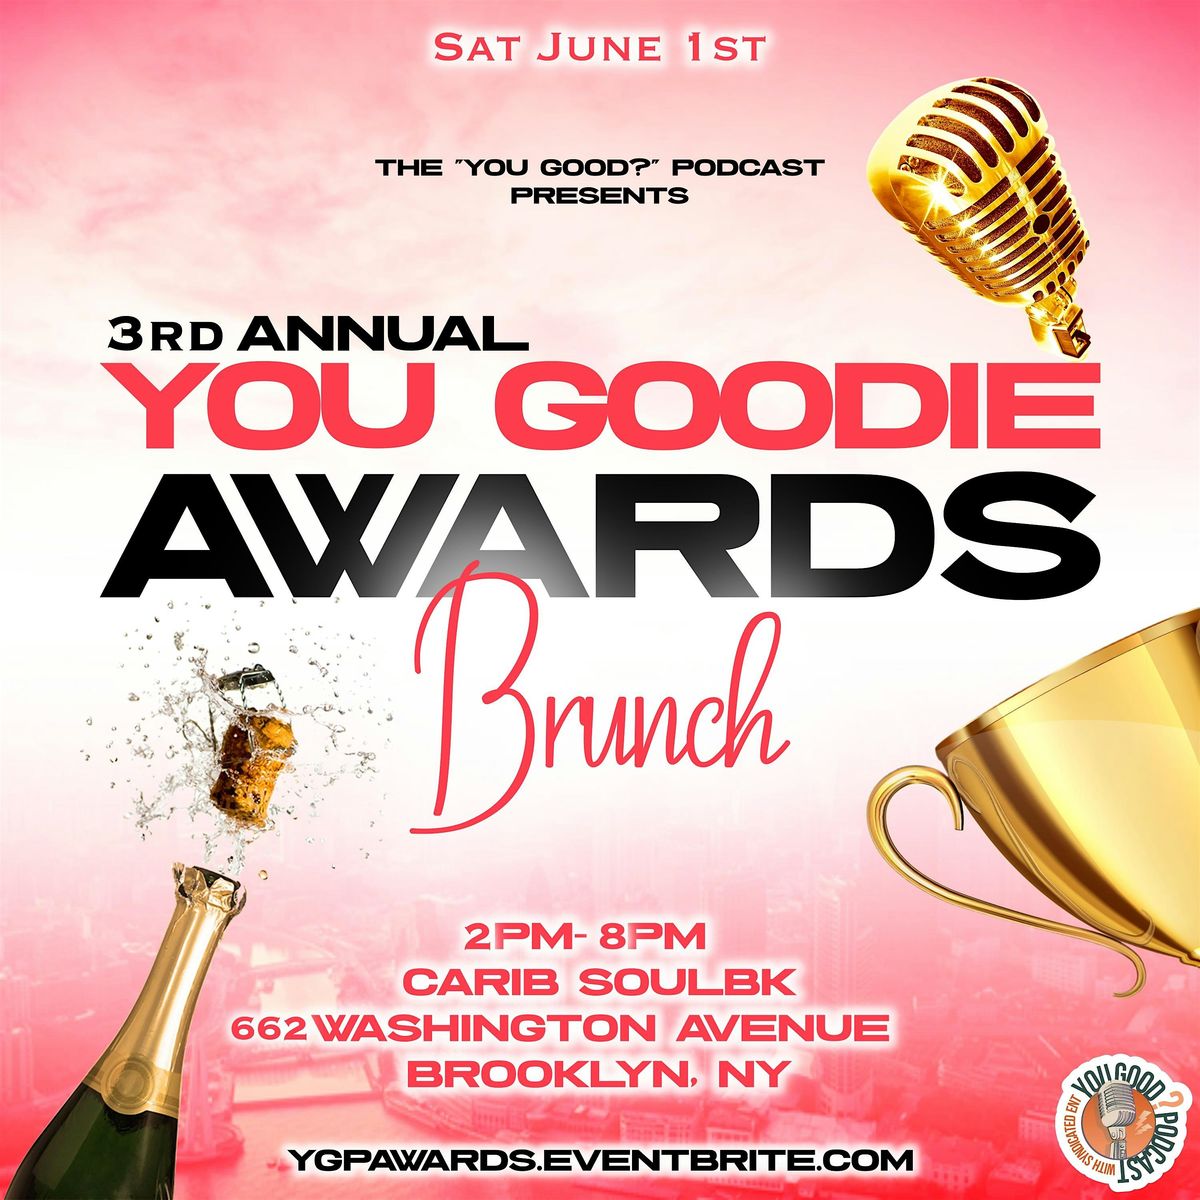 The You Goodie Awards Brunch & Day Party